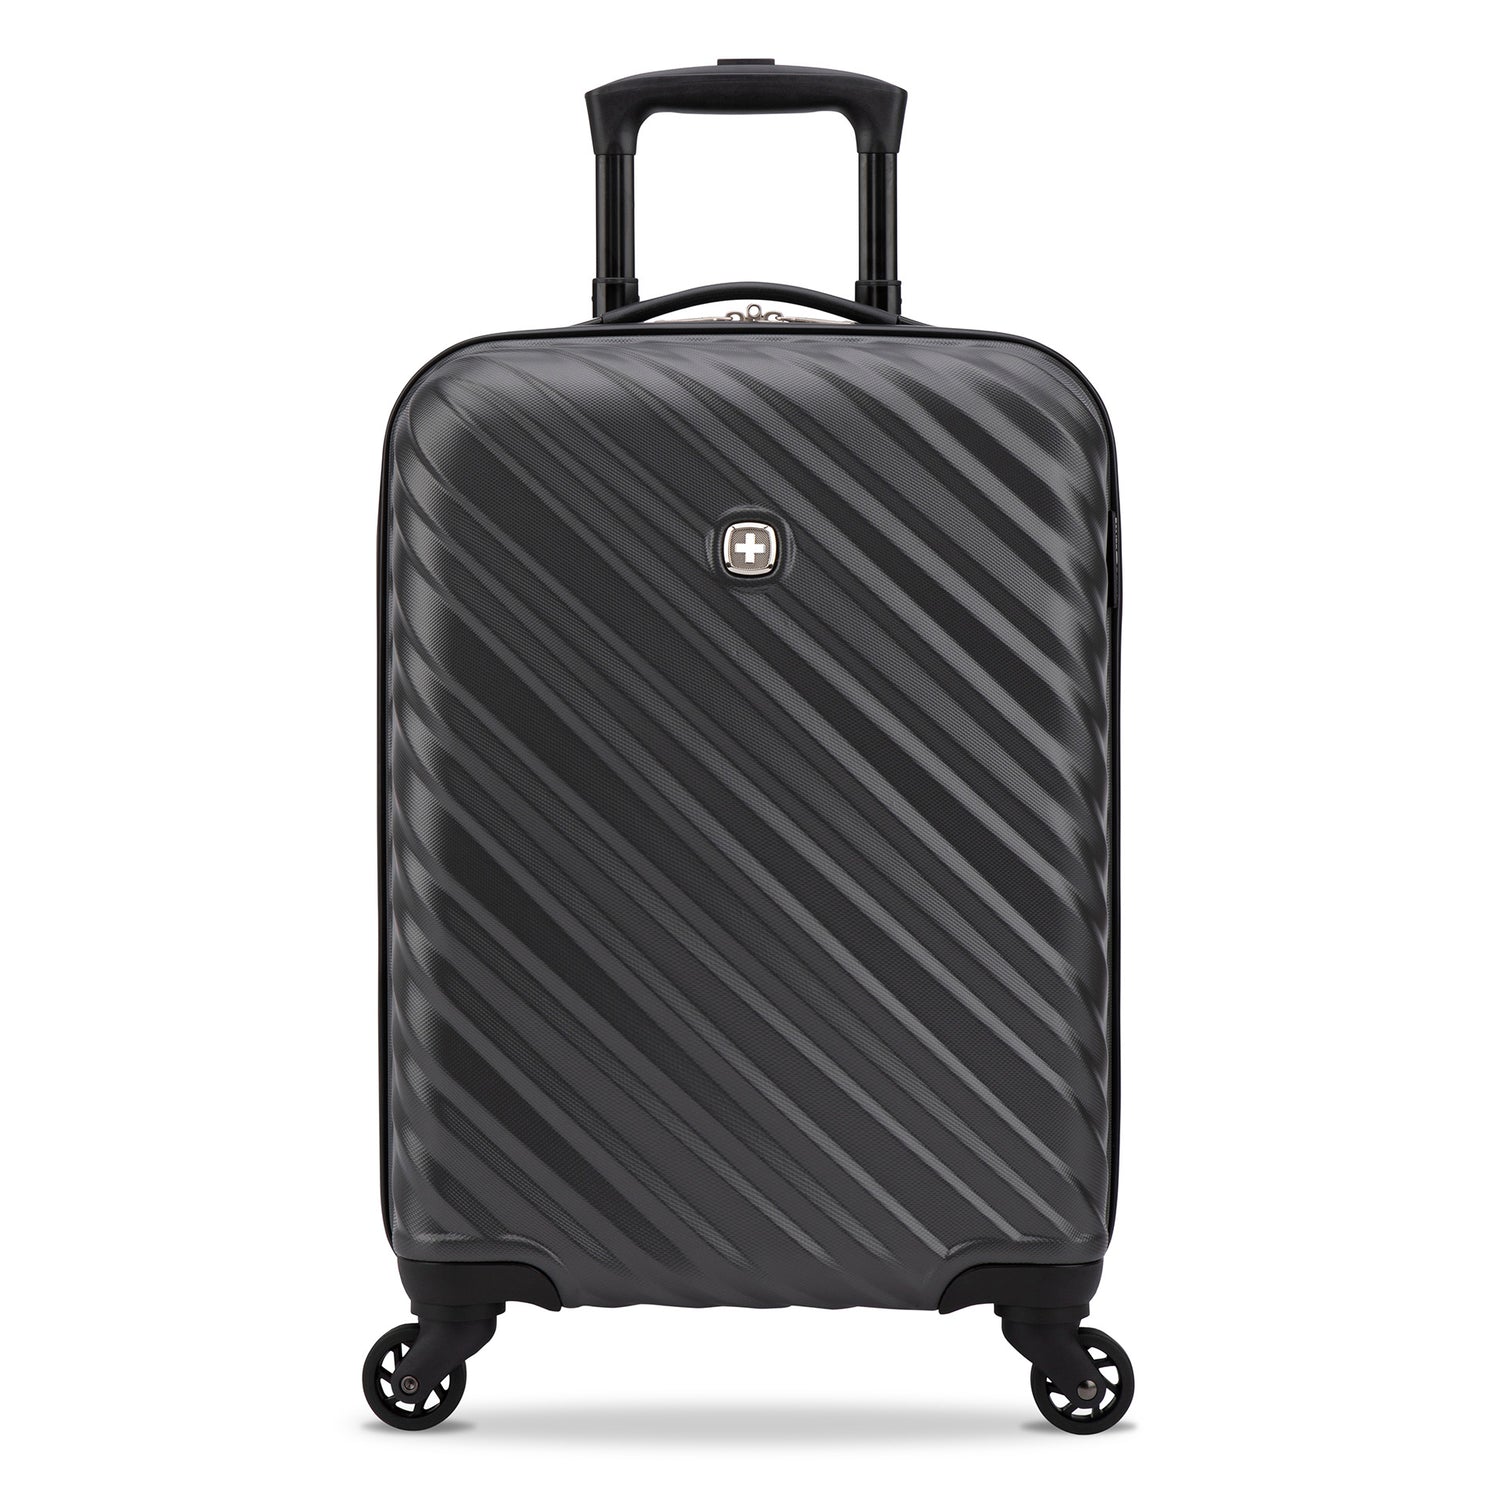 Front side view of a black hard side luggage called MOD designed by Swiss Gear sold at Bentley, showcasing its telescopic handle and resistant-absorbant texture.